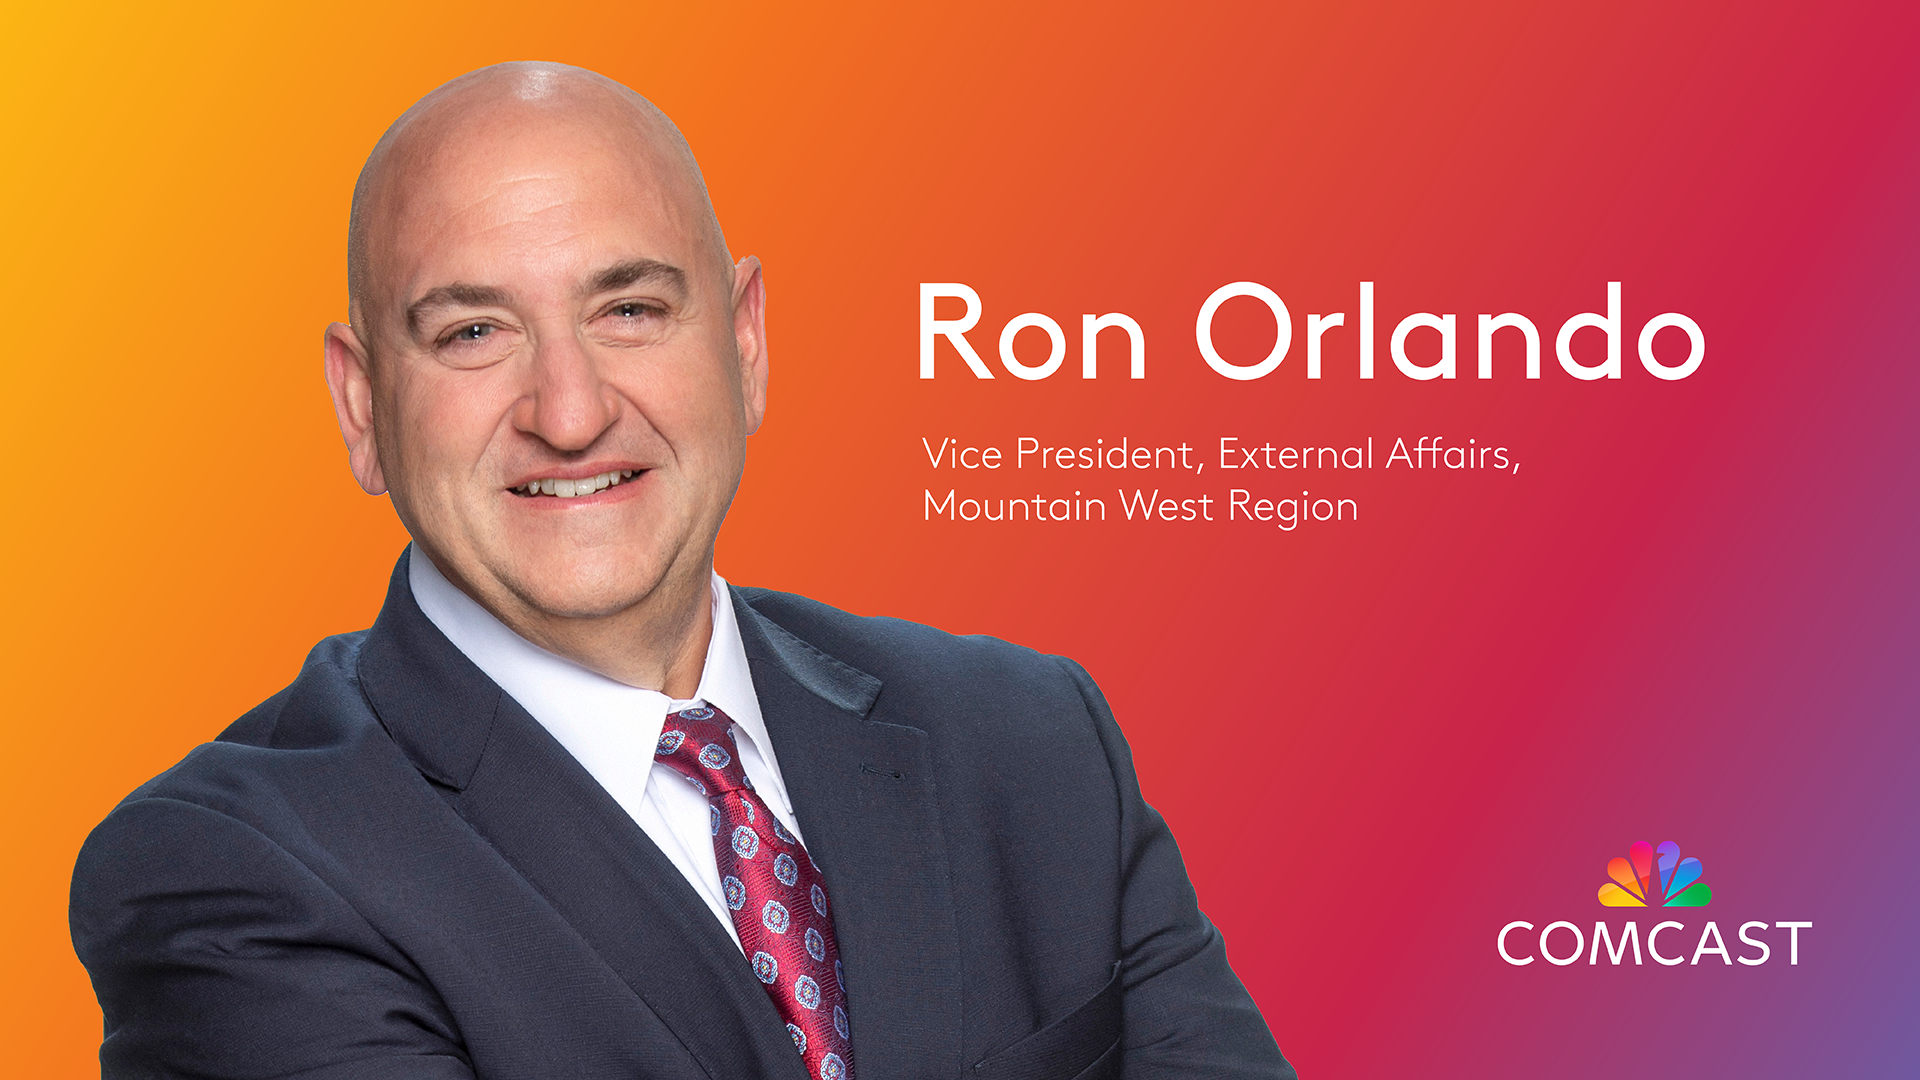 Comcast Names Ron Orlando to Lead External Affairs in Mountain West Region 